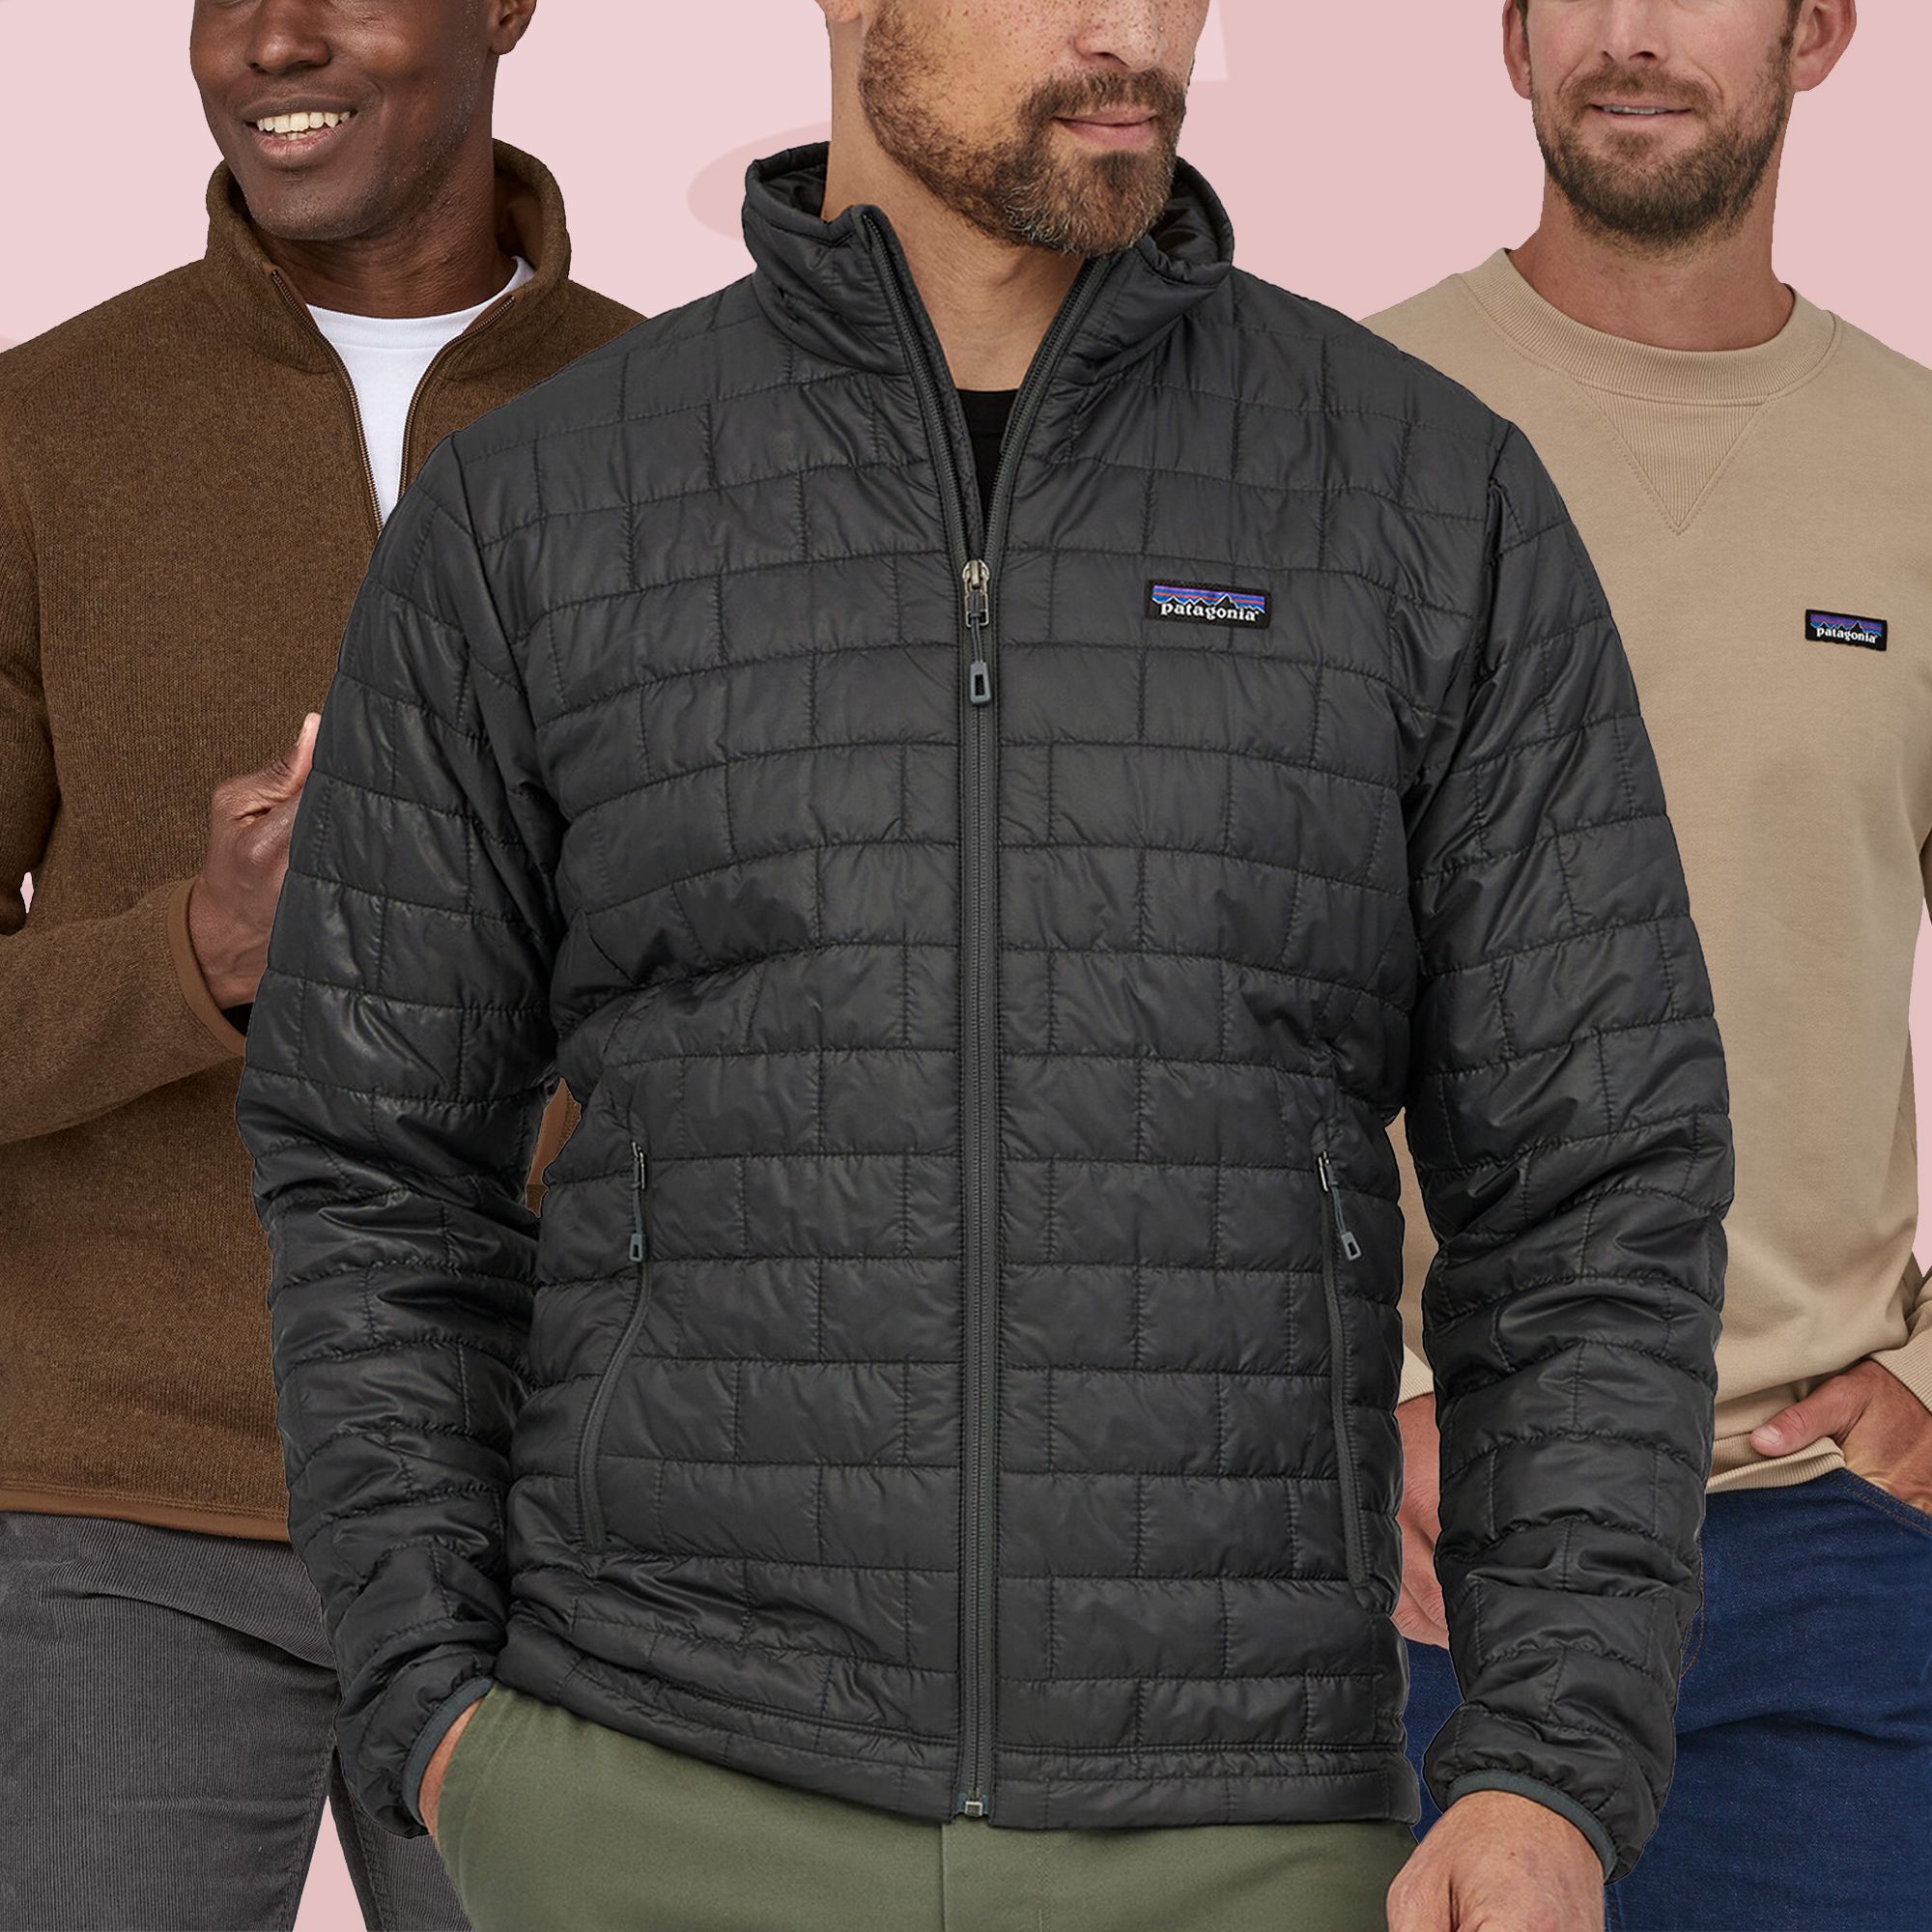 Patagonia's Winter Sale Has Everything You Need to Stay Warm